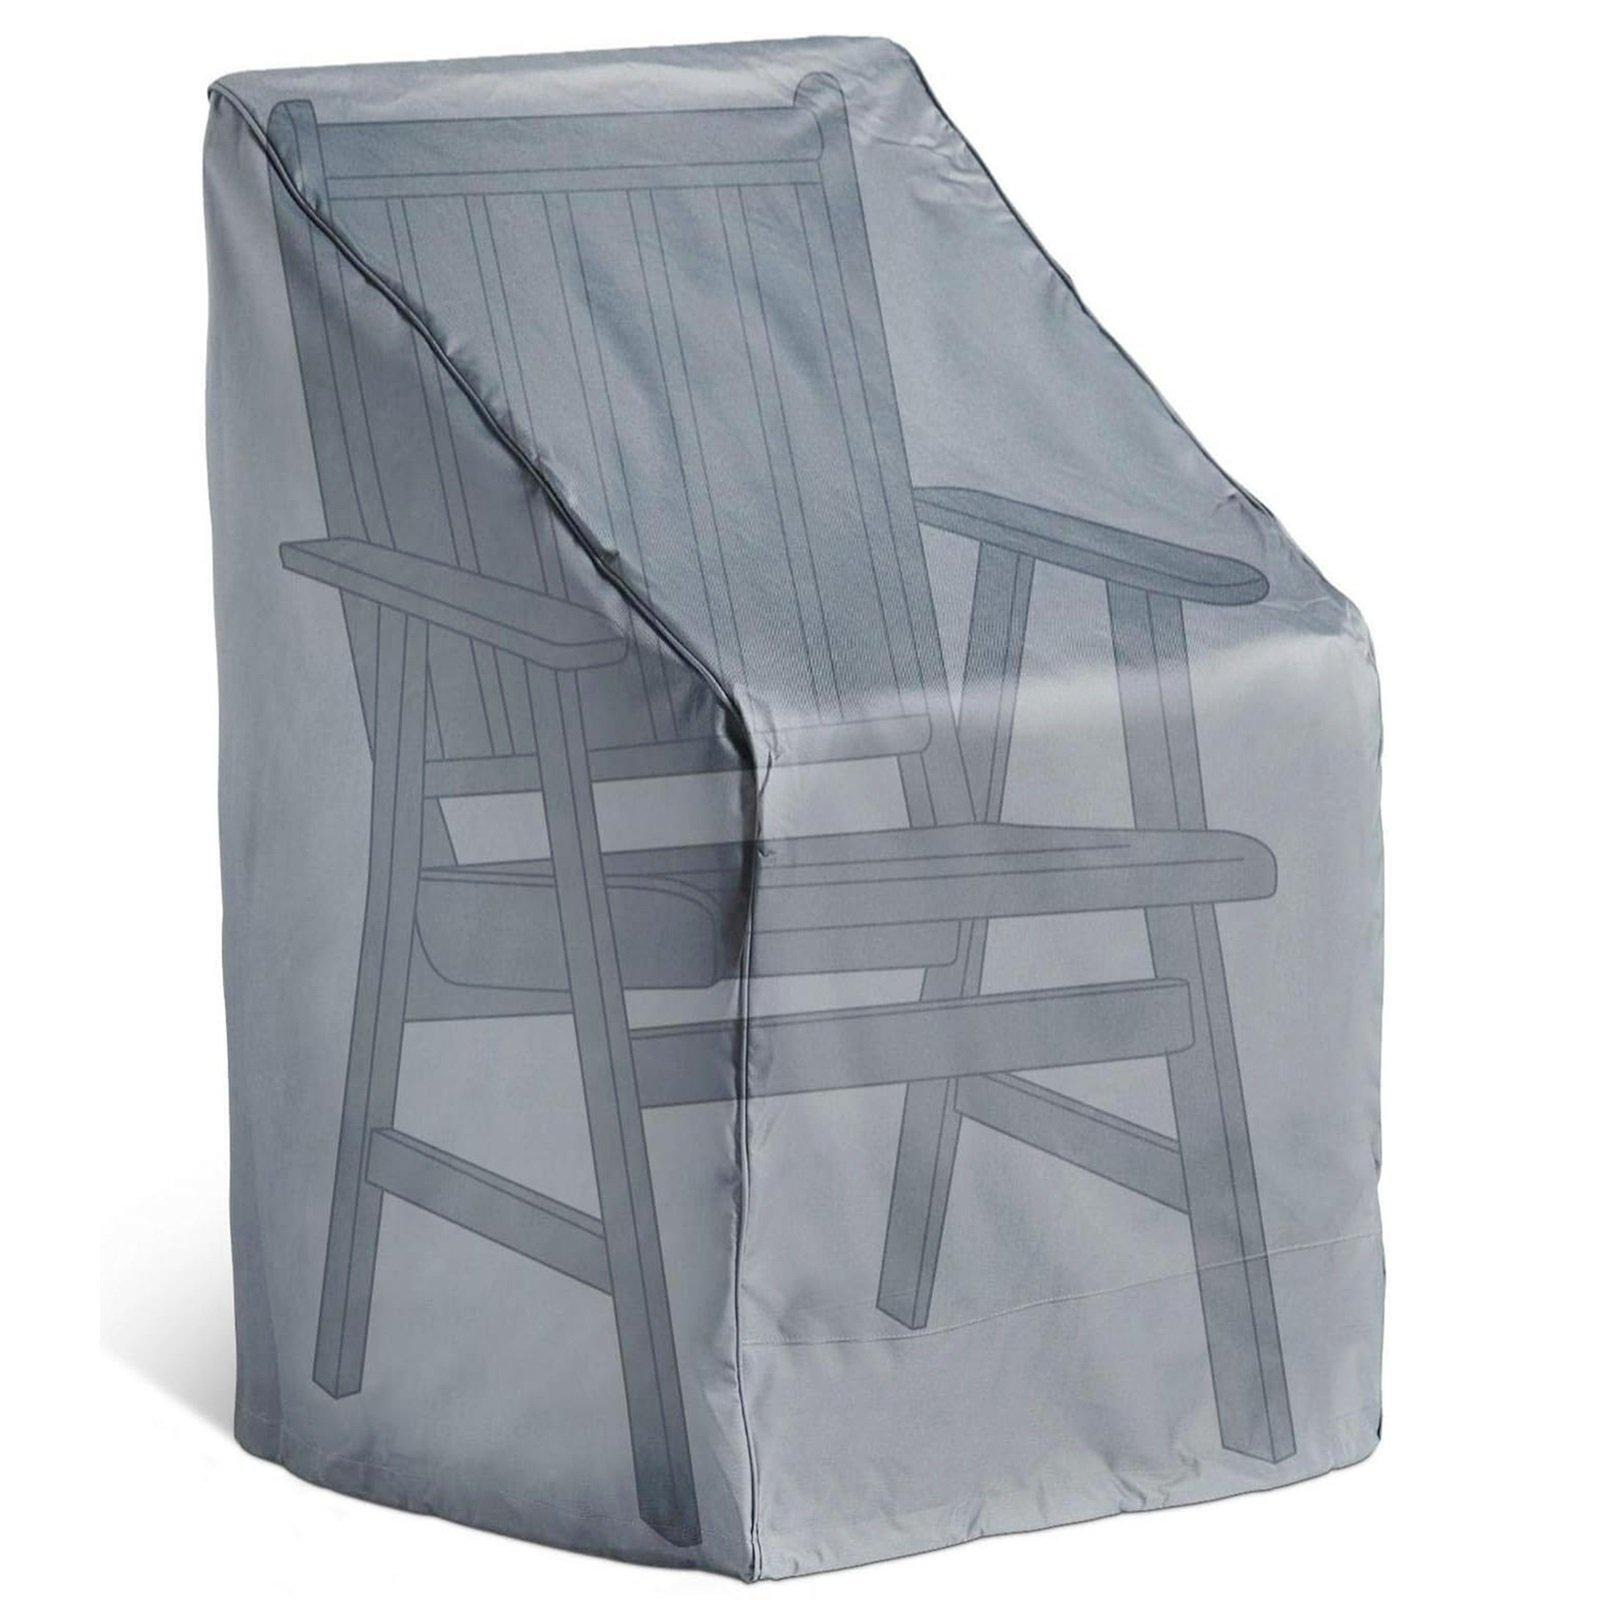 Garden Waterproof Single Chair Cover Protector - image 1